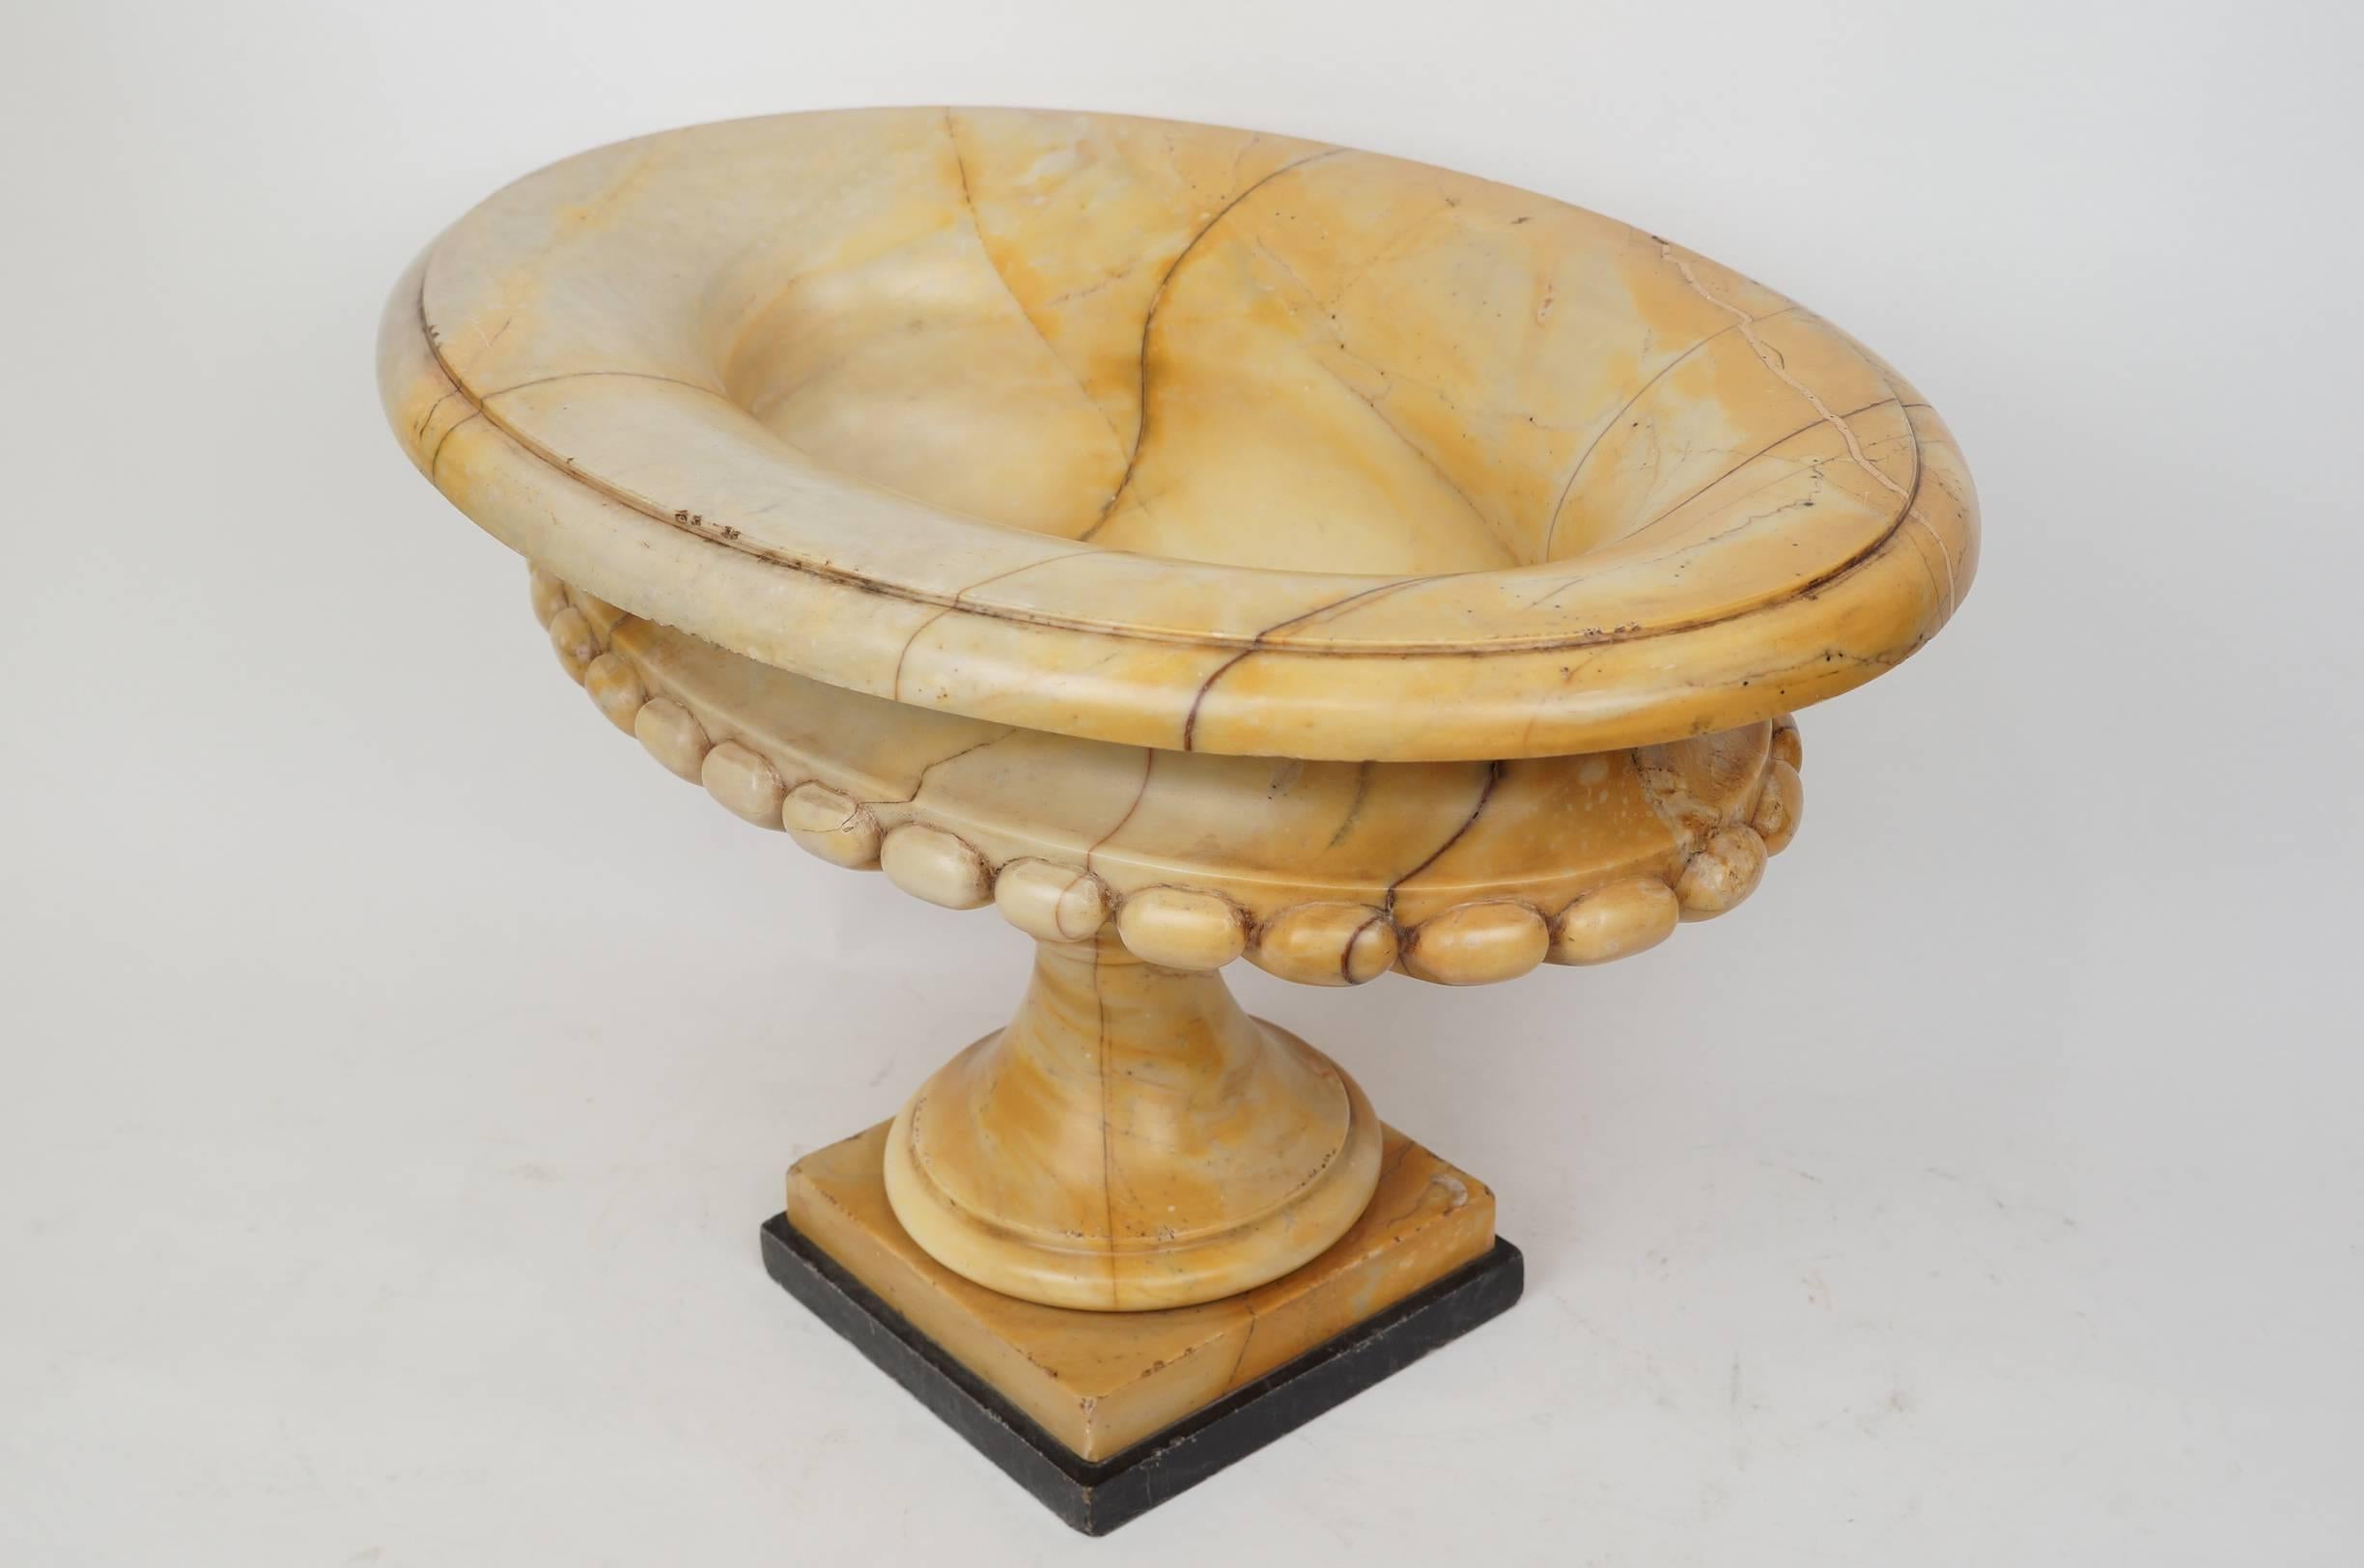 Wonderful oval pair of neoclassical marble footed centrepiece tazza bowls.
Stock number: DA101.